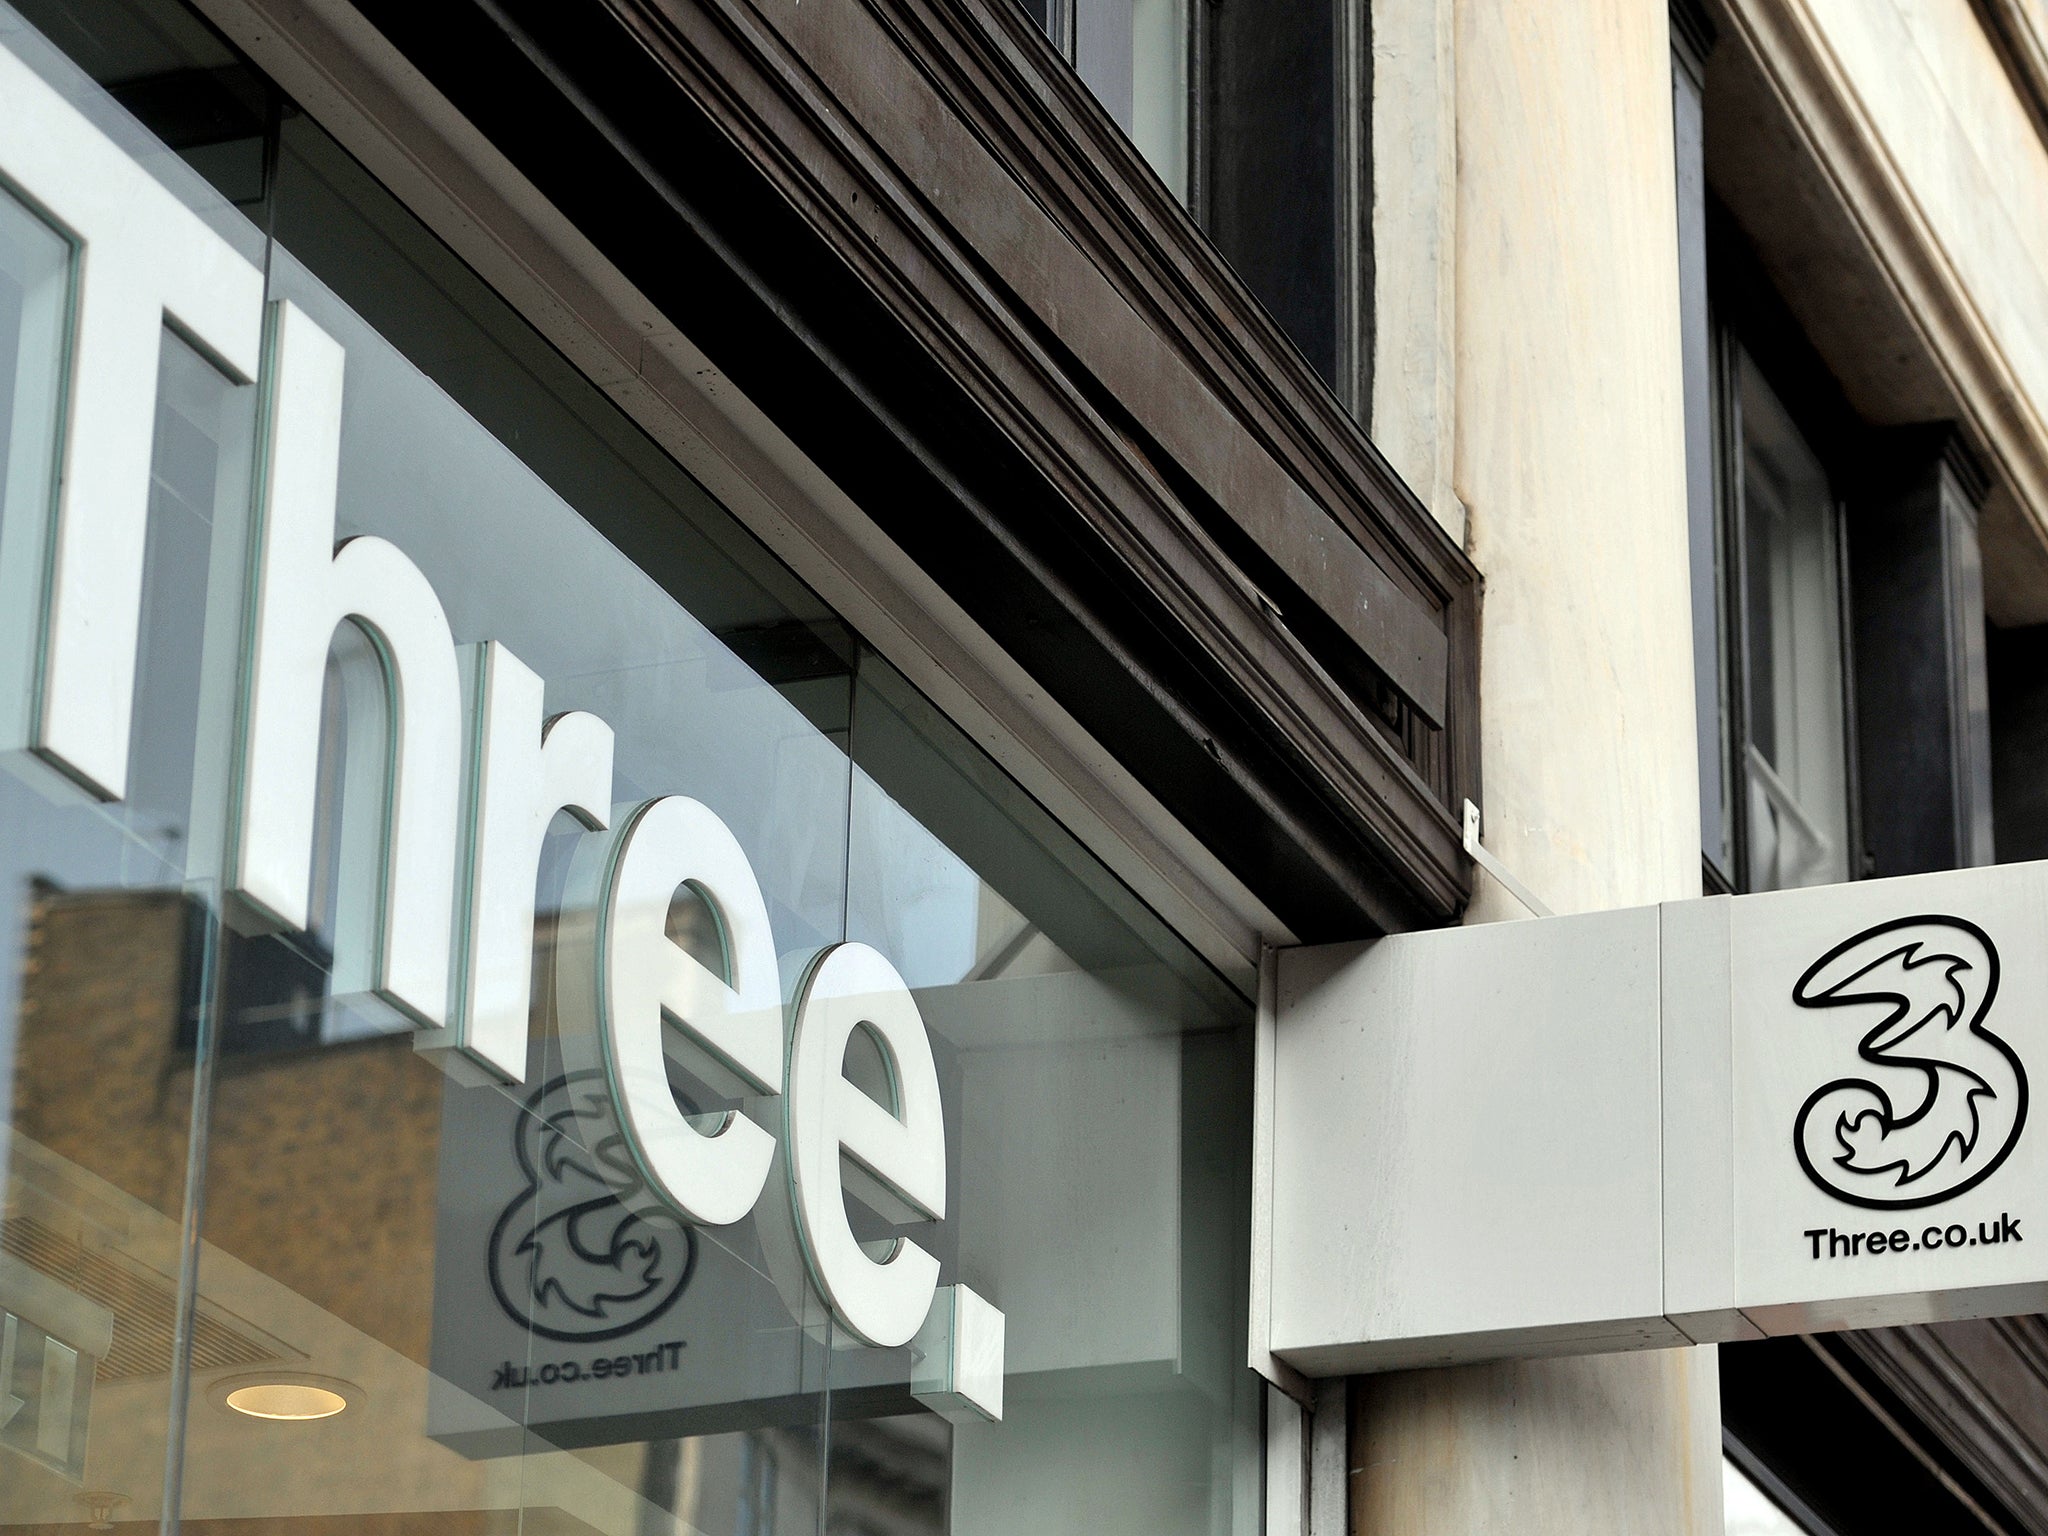 A shop sign for Three mobile in central London